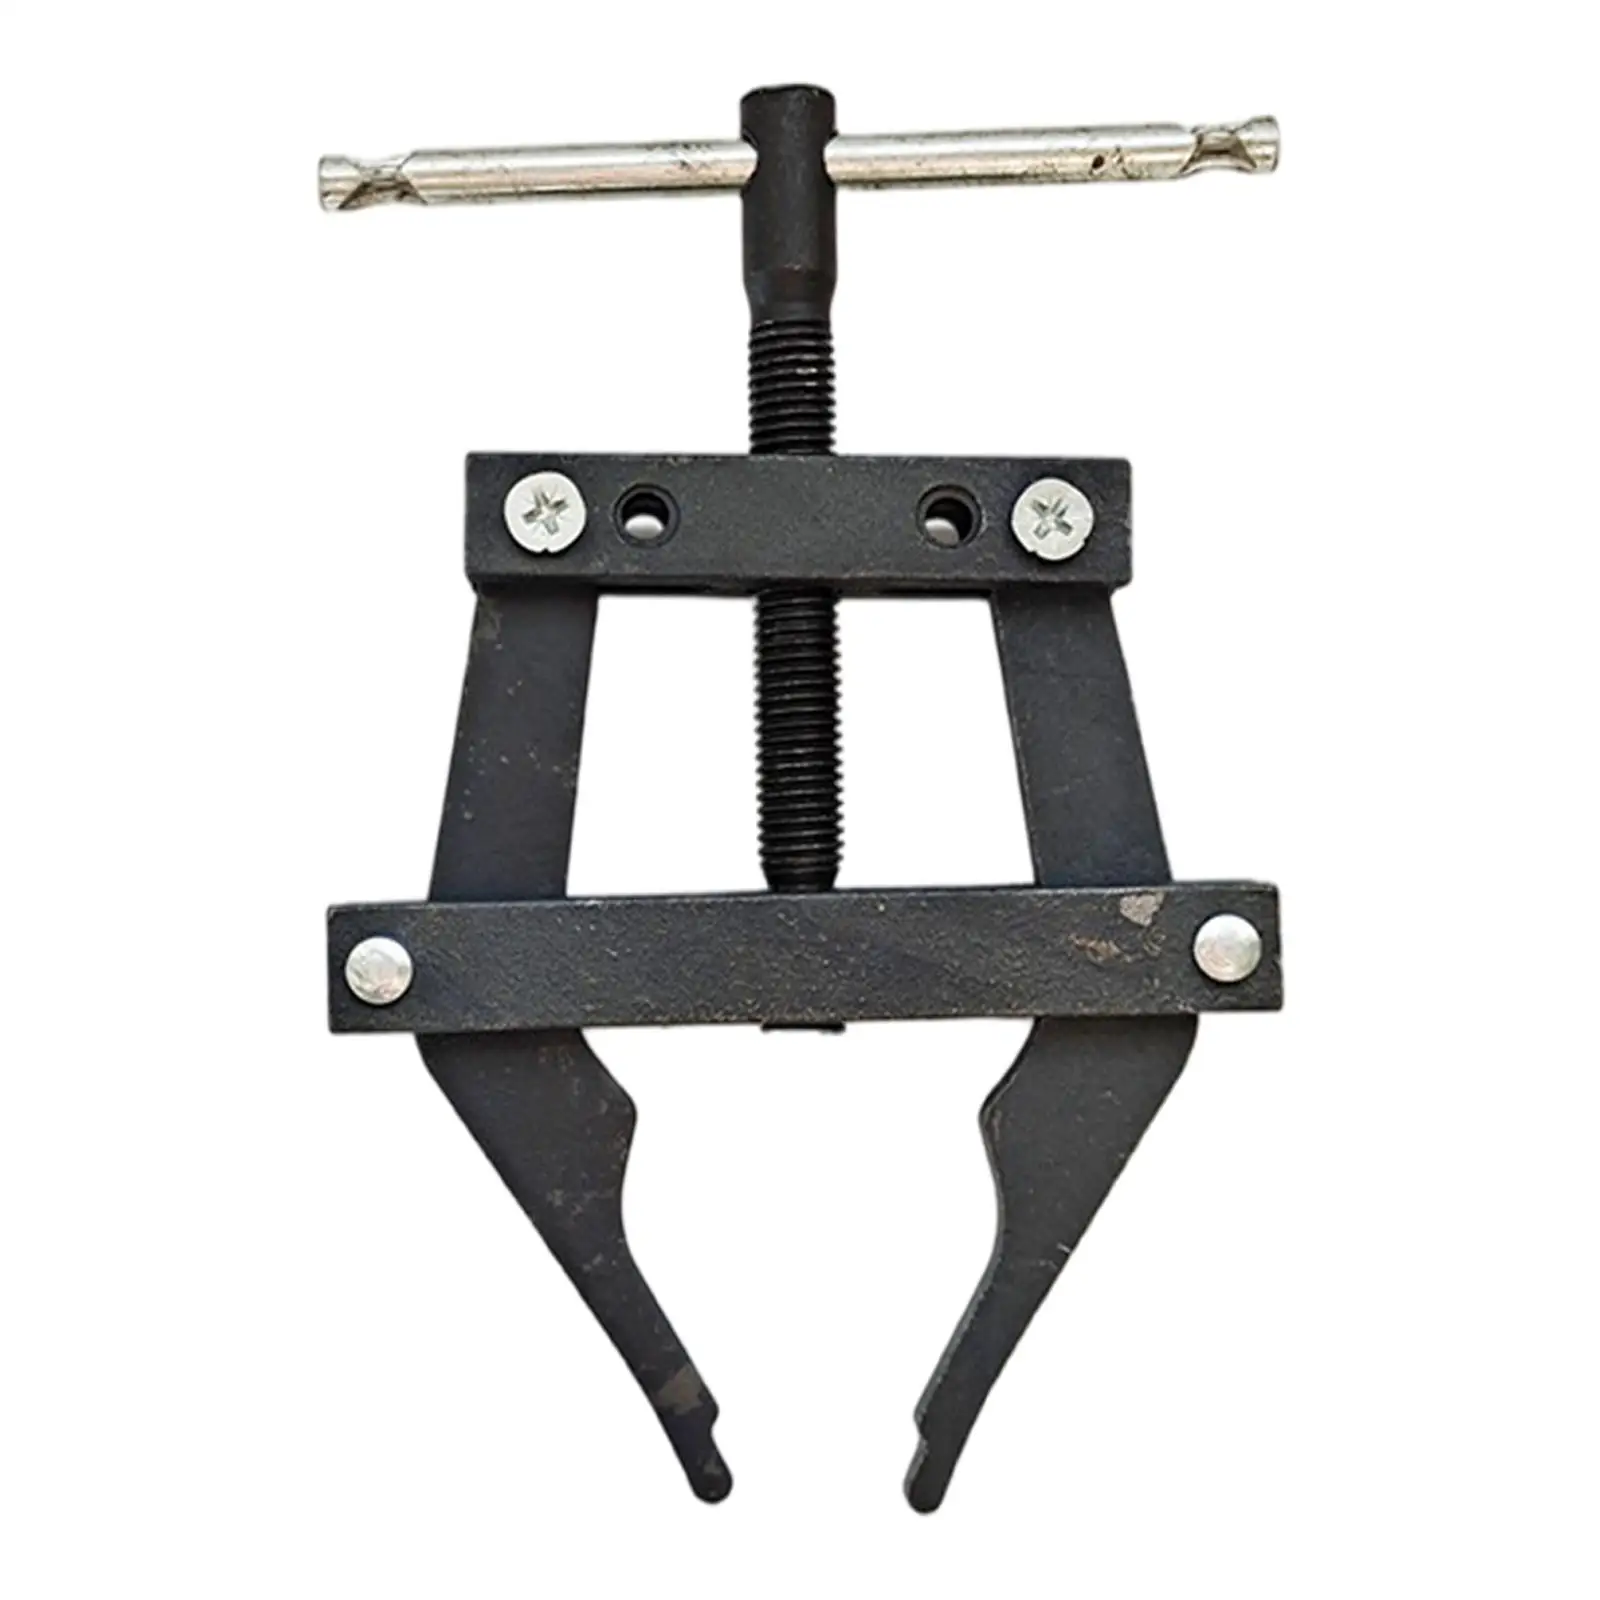 Chain Connecting Tool Repair Tool Chain Tightener Puller Holder for Cycling